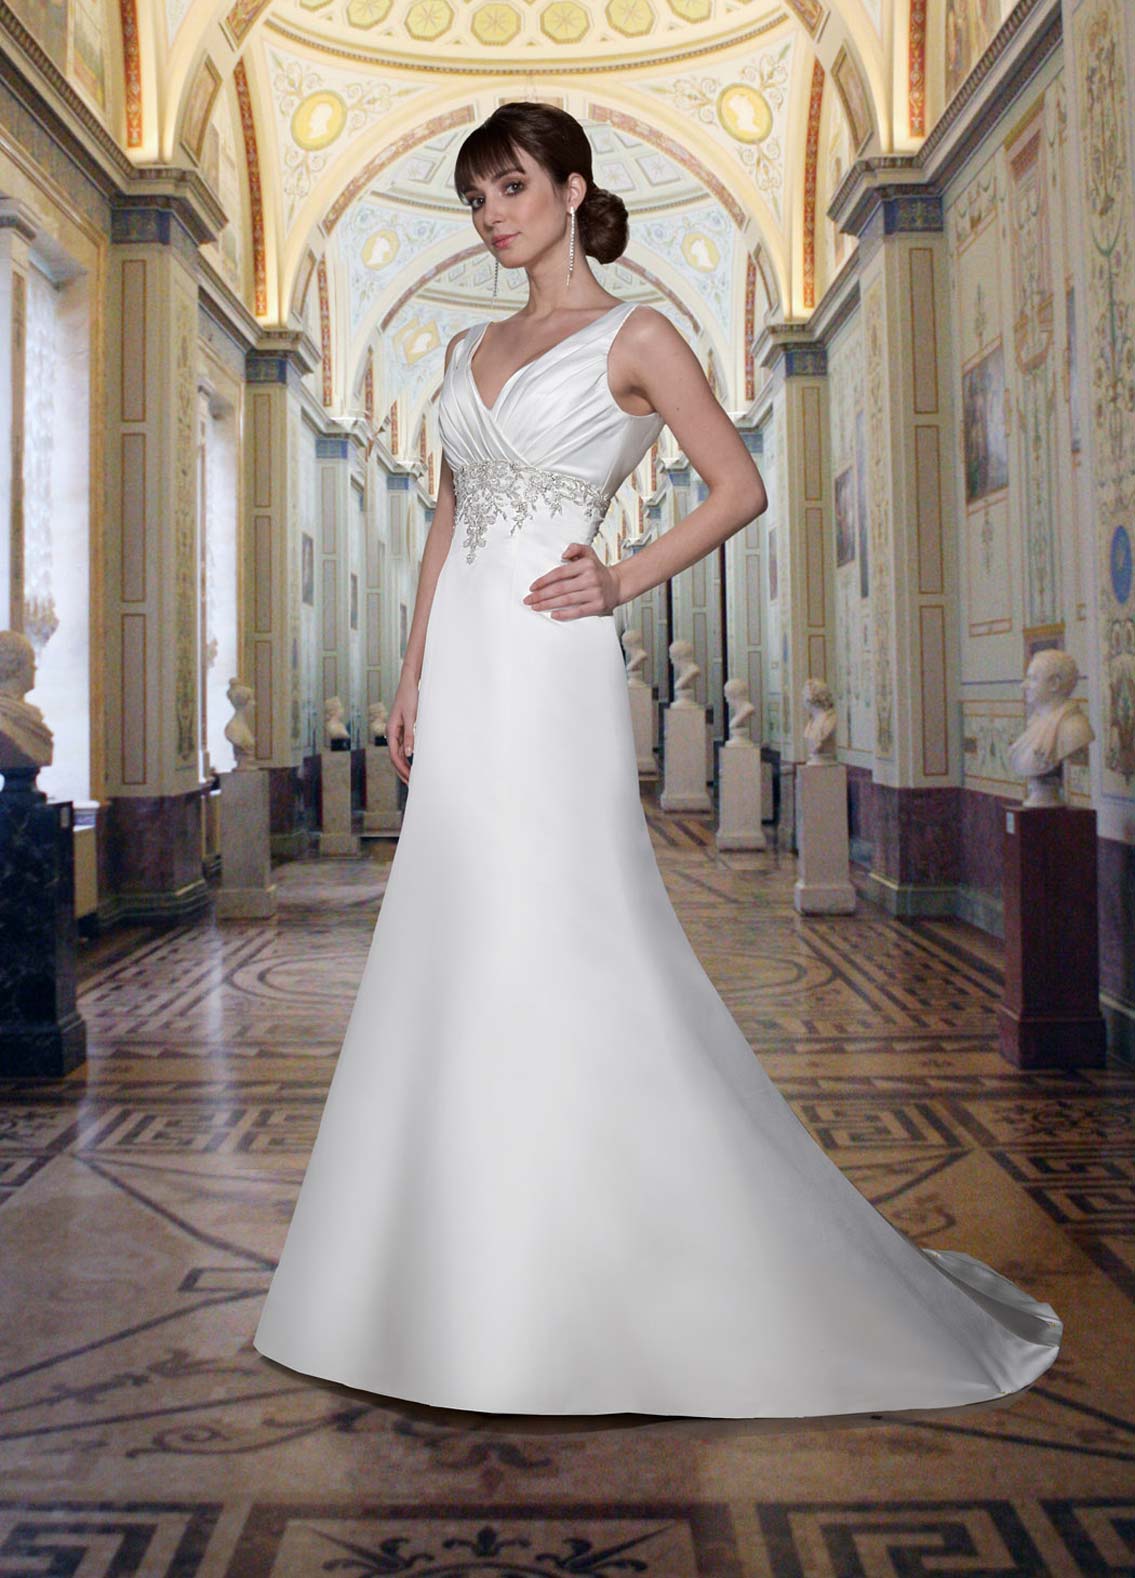 Davinci Bridal 8373 is a Gorgeous Heavy Sating Bridal Gown. This Plus size wedding dress features a Heavy Ivory Satin material with a pleated bodice with a V neckline and wide straps. Detailed Embellishments & Beading accent the waist line all the way around. The intricate beading, sequins & crystal create the illusion of embroidered lace with a more detailed & Glam Affect. Simple A Line silhouette.   Available Sizes: 24  Available Color: Ivory